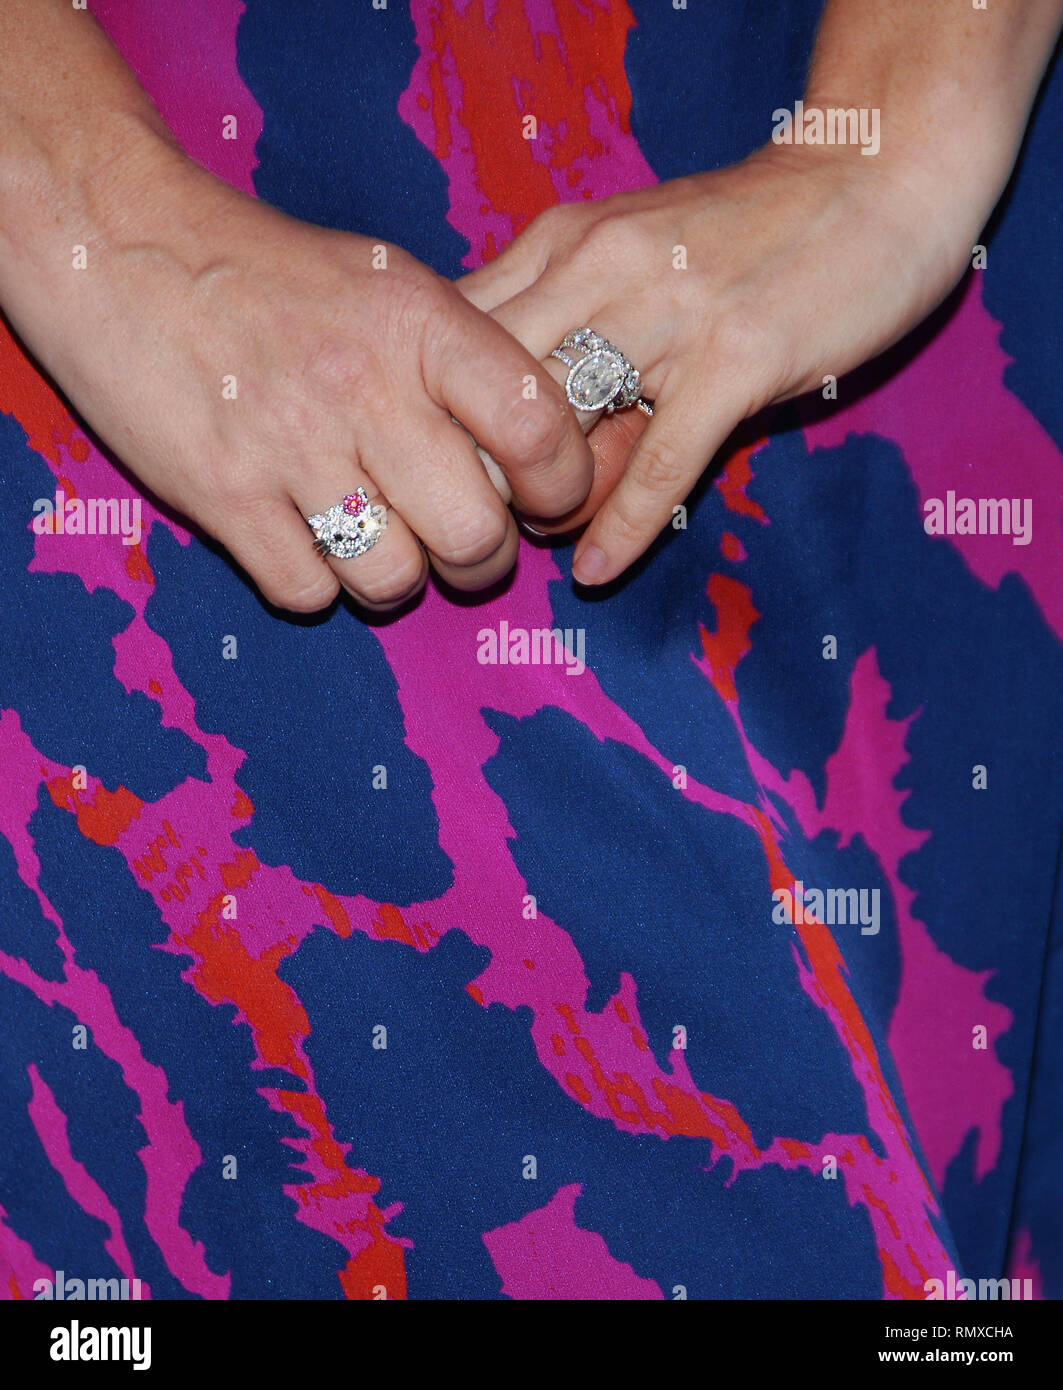 Joely Fisher arriving at the FOX tca Summer party at the Ritz Carlton In Los Angeles. July 25, 2006.  detail of the rings FisherJoely251.JPGFisherJoely251  Event in Hollywood Life - California, Red Carpet Event, Vertical, USA, Film Industry, Celebrities, Photography, Bestof, Arts Culture and Entertainment, Topix Celebrities fashion, Best of, Hollywood Life, Event in Hollywood Life - California, Red Carpet and backstage, movie celebrities, TV celebrities, Music celebrities, Topix, from the year 2000-2009 inquiry tsuni@Gamma-USA.com , Credit Tsuni / USA,  Object wear on the red carpet, one perso Stock Photo